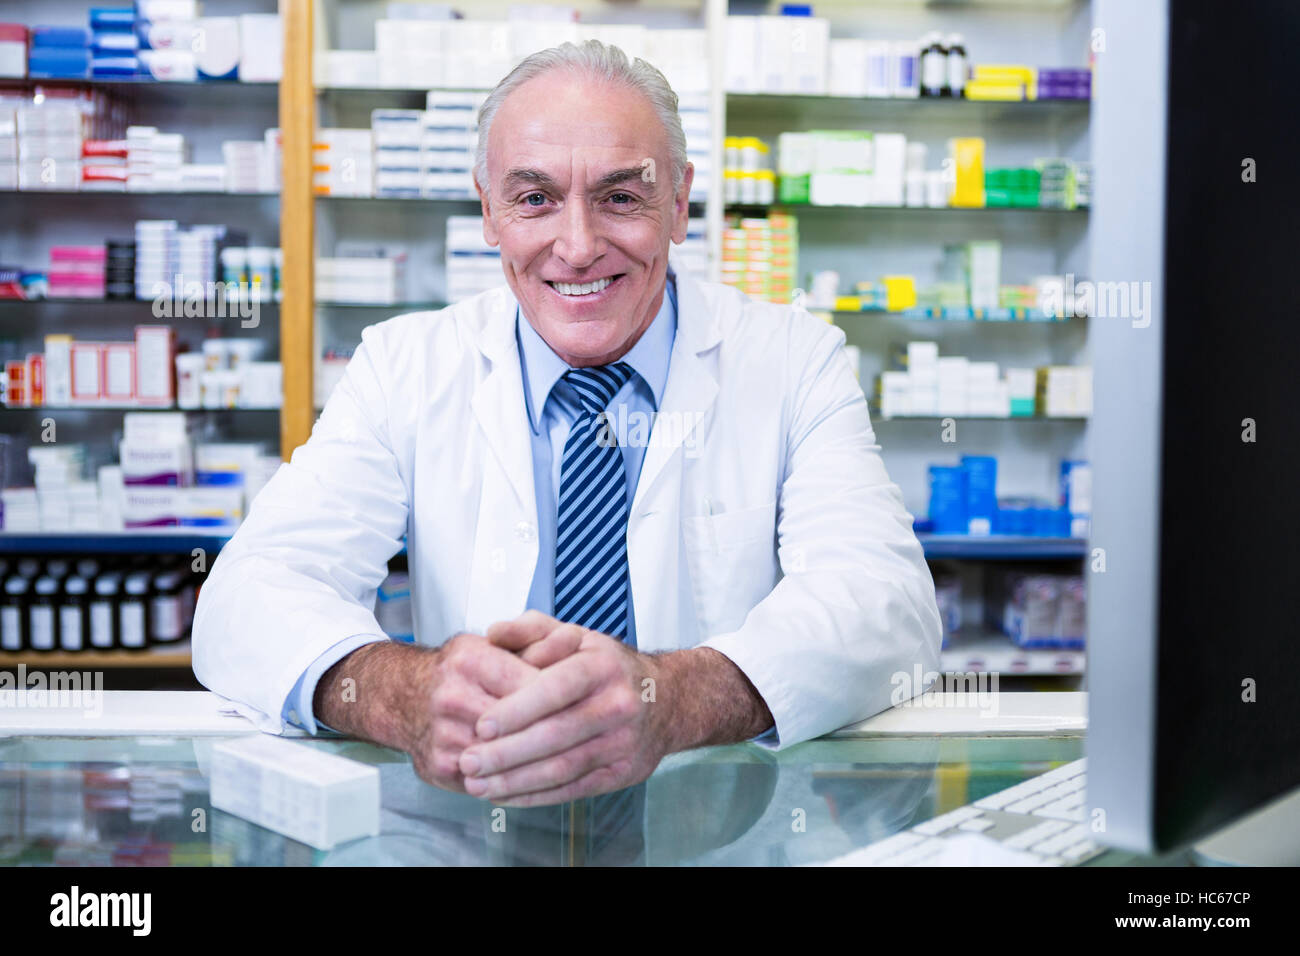 Pharmacist sitting at counter Stock Photo